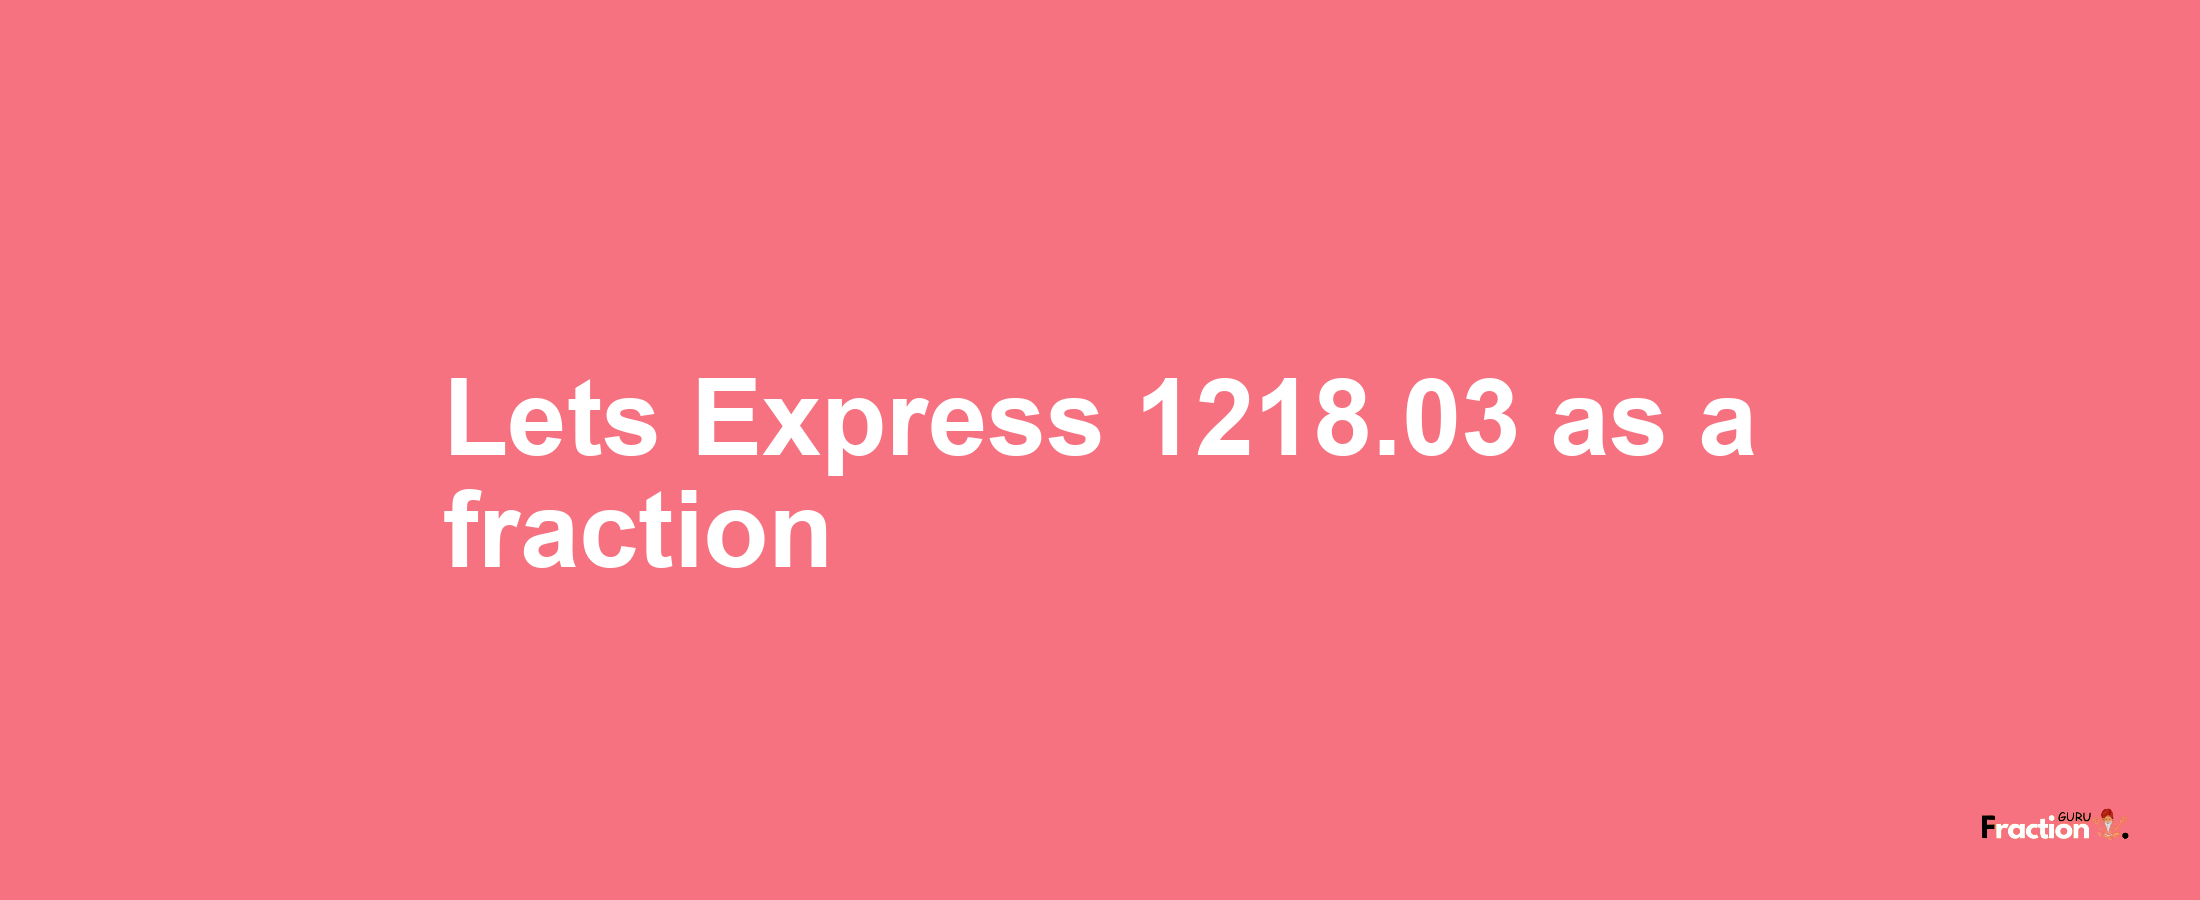 Lets Express 1218.03 as afraction